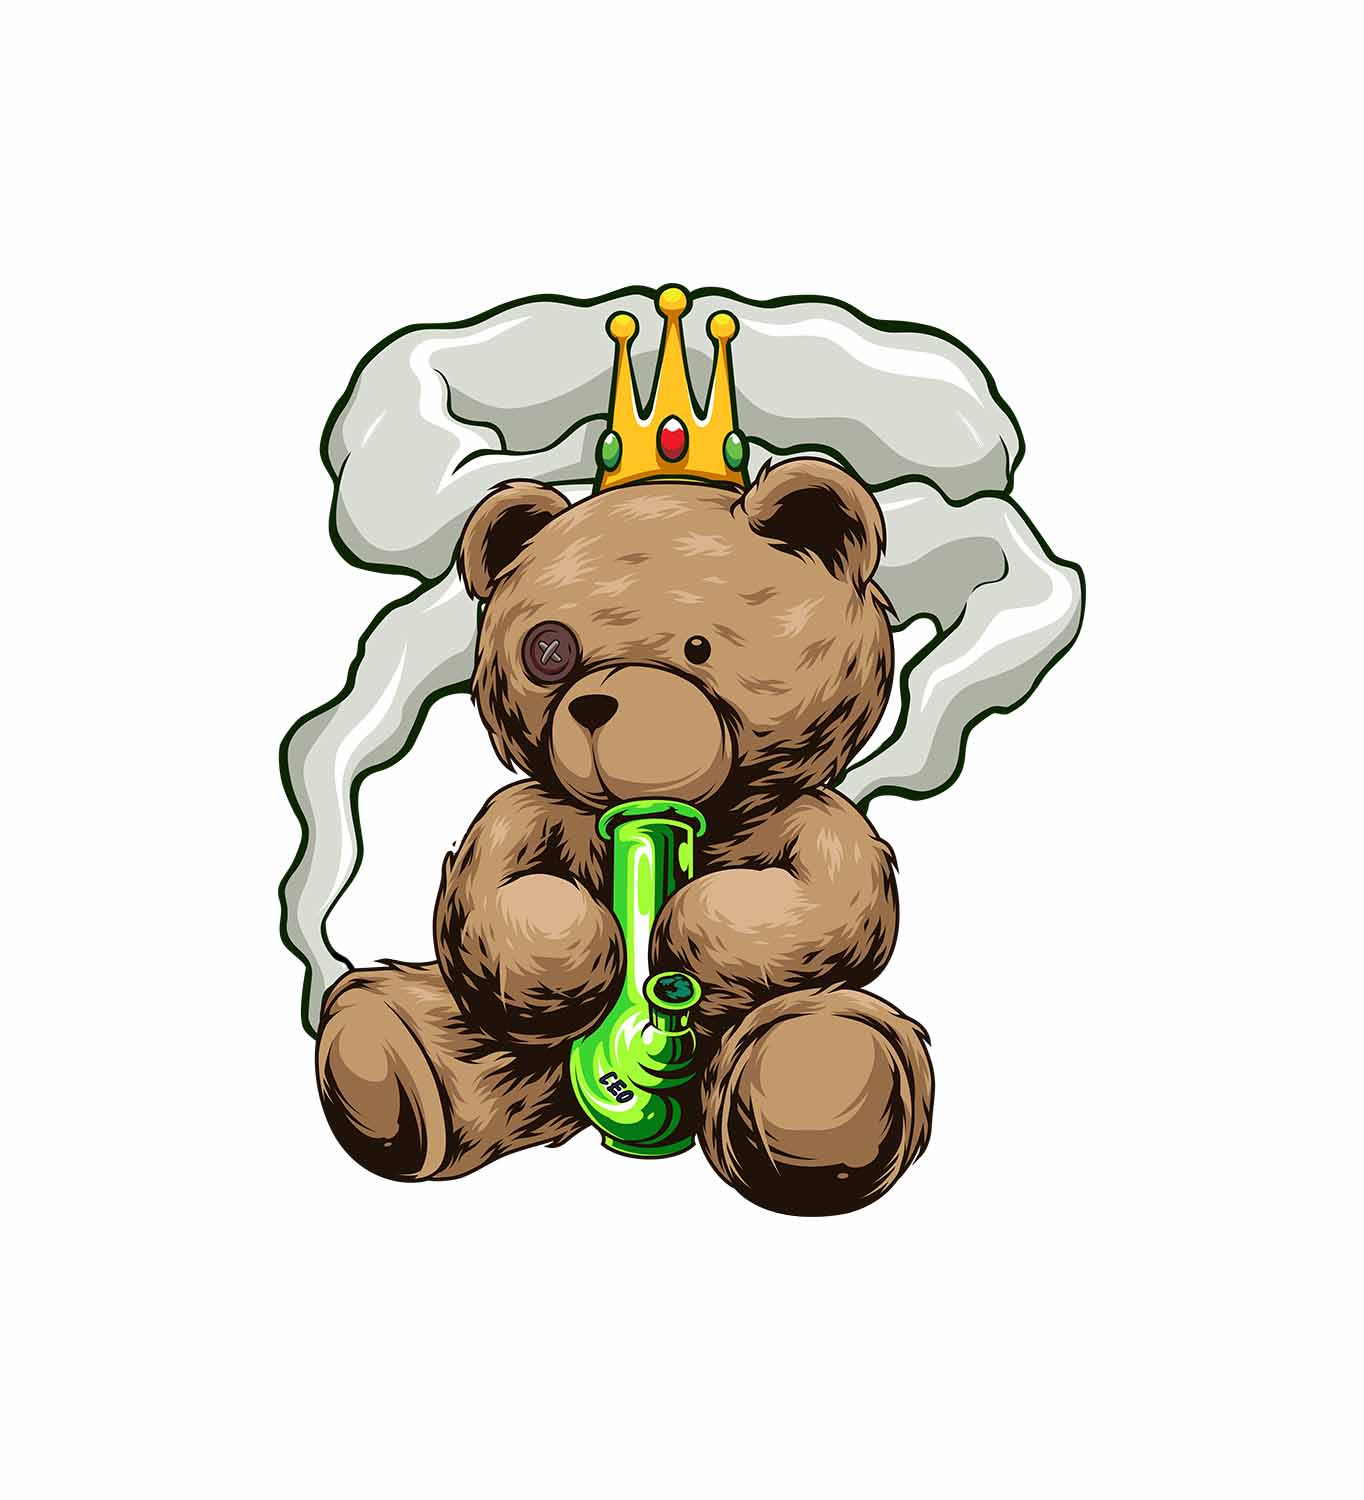 The CEO bear. Representing Alien Octane and You-smoke-mids.com for the CEO.  The bear with exotics!